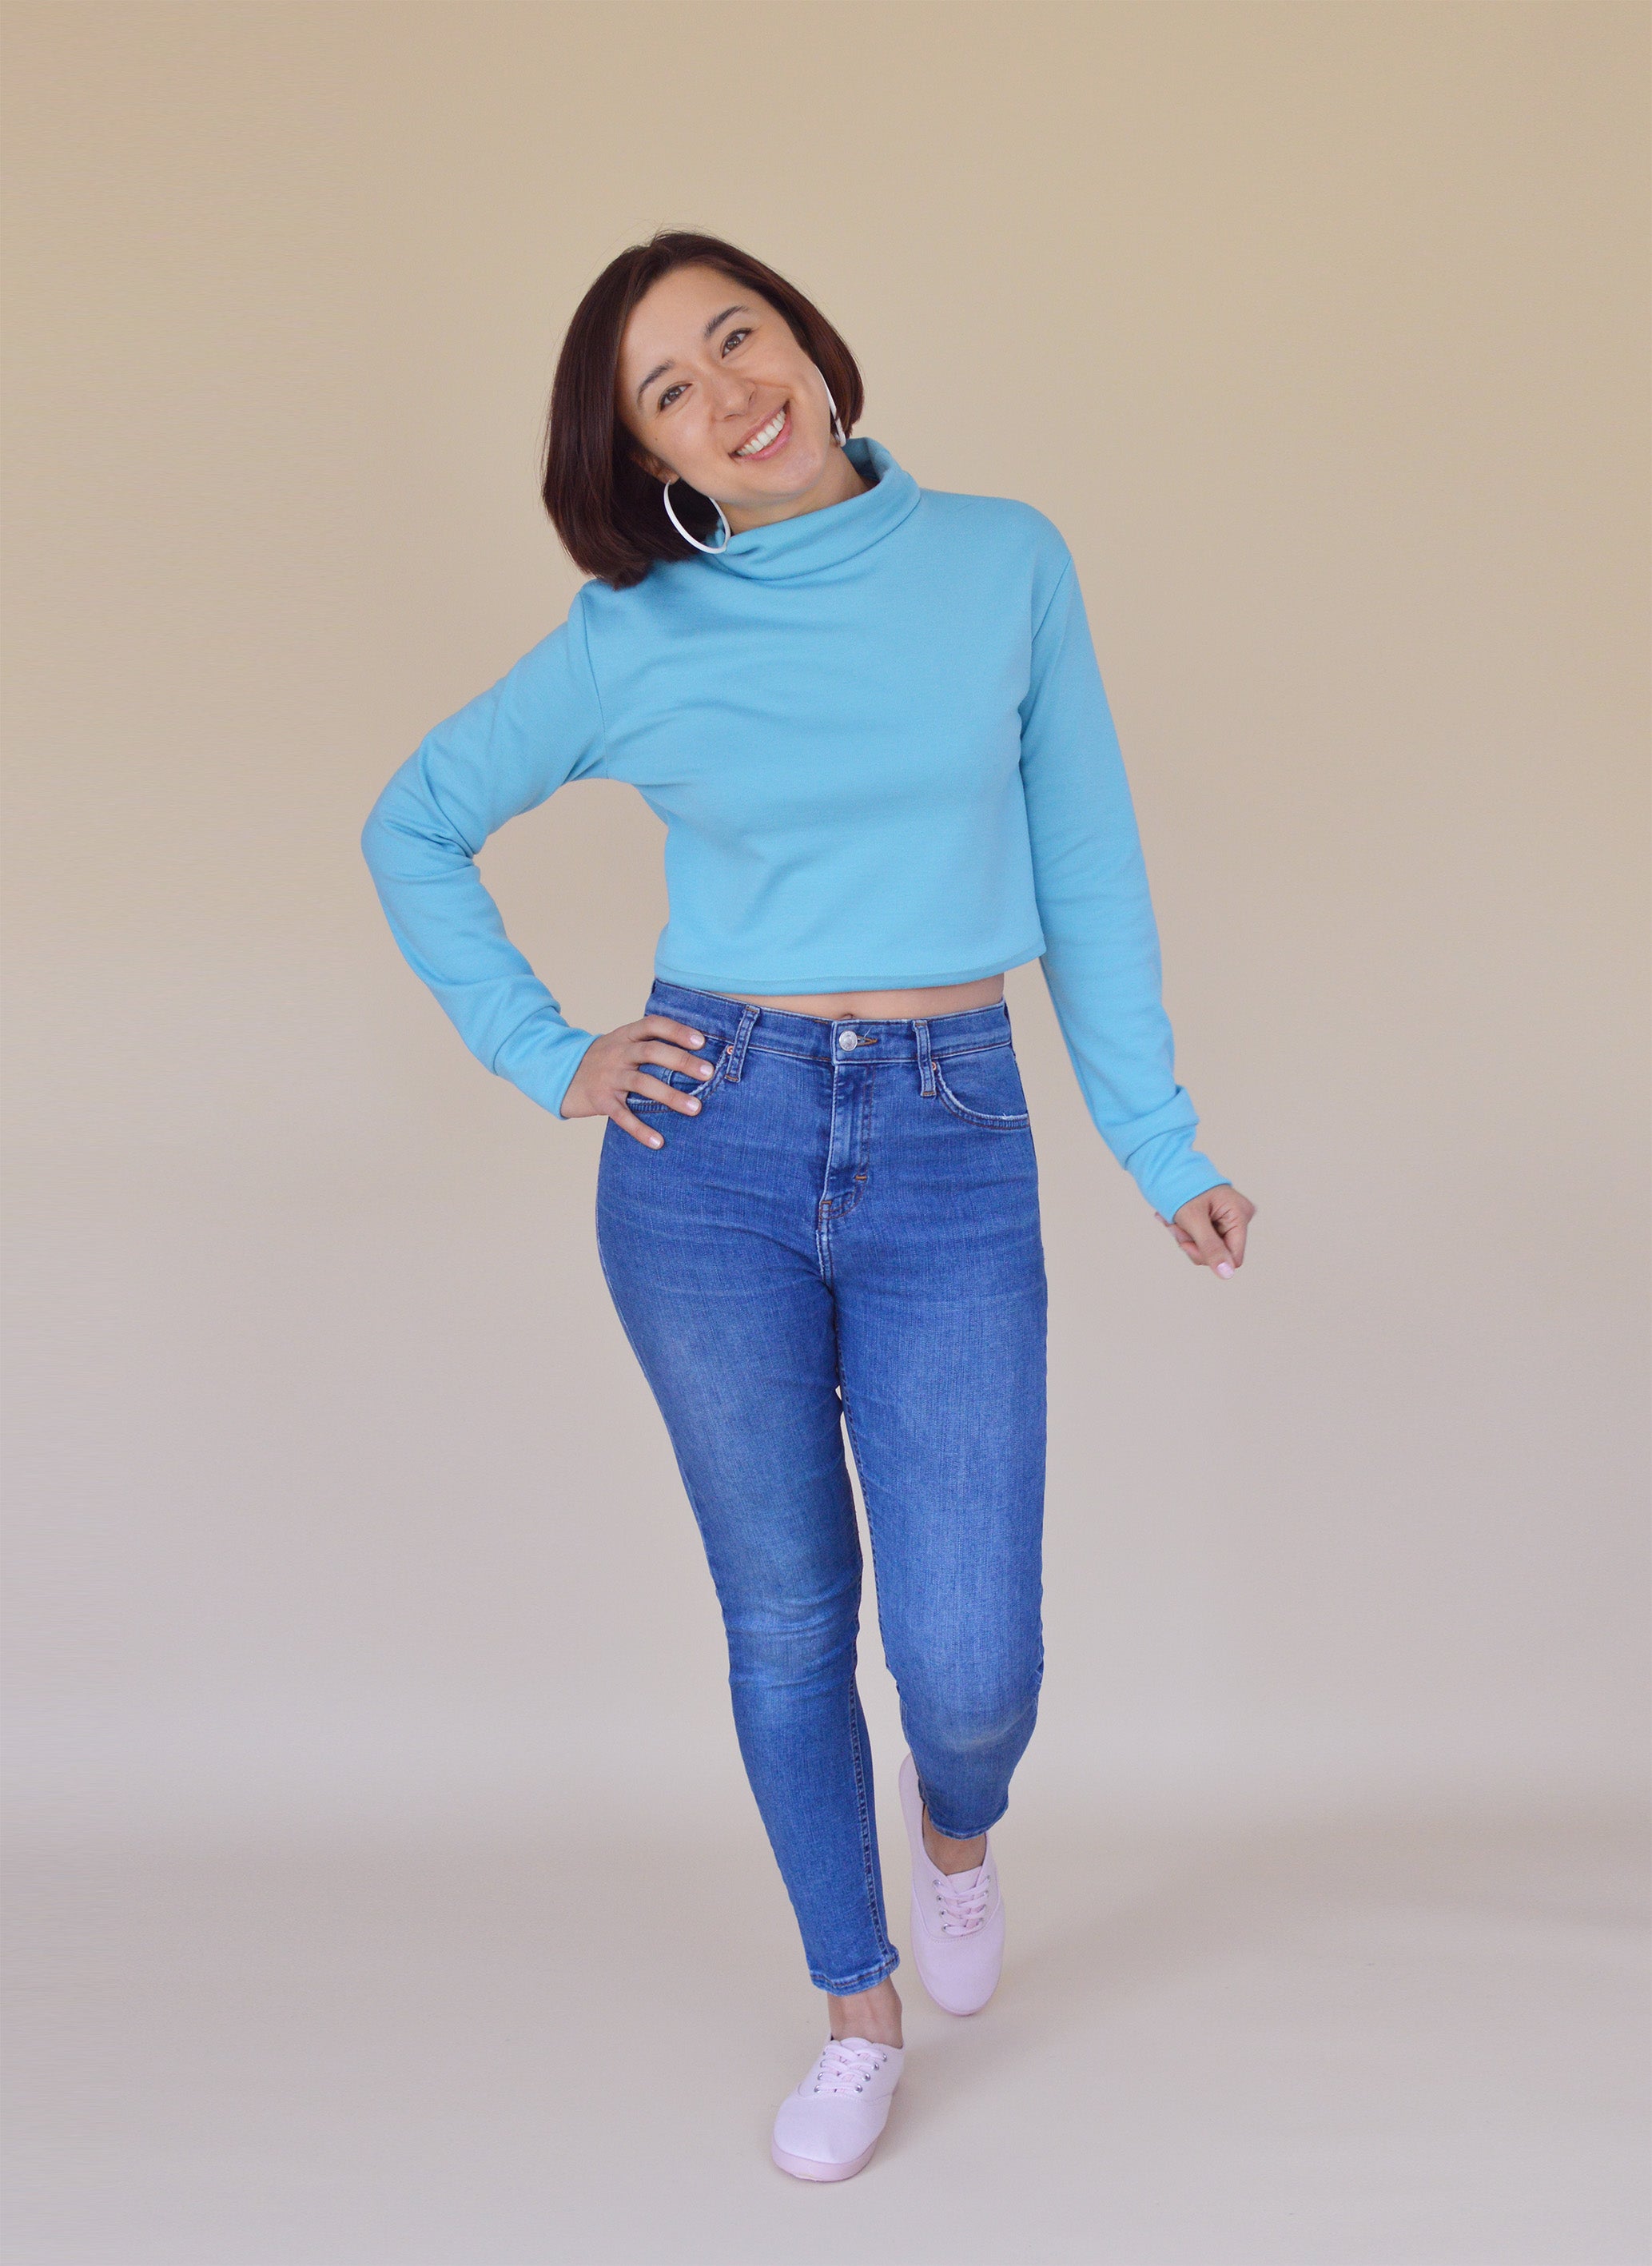 NINA LEE The Southbank Sweater Sewing Pattern